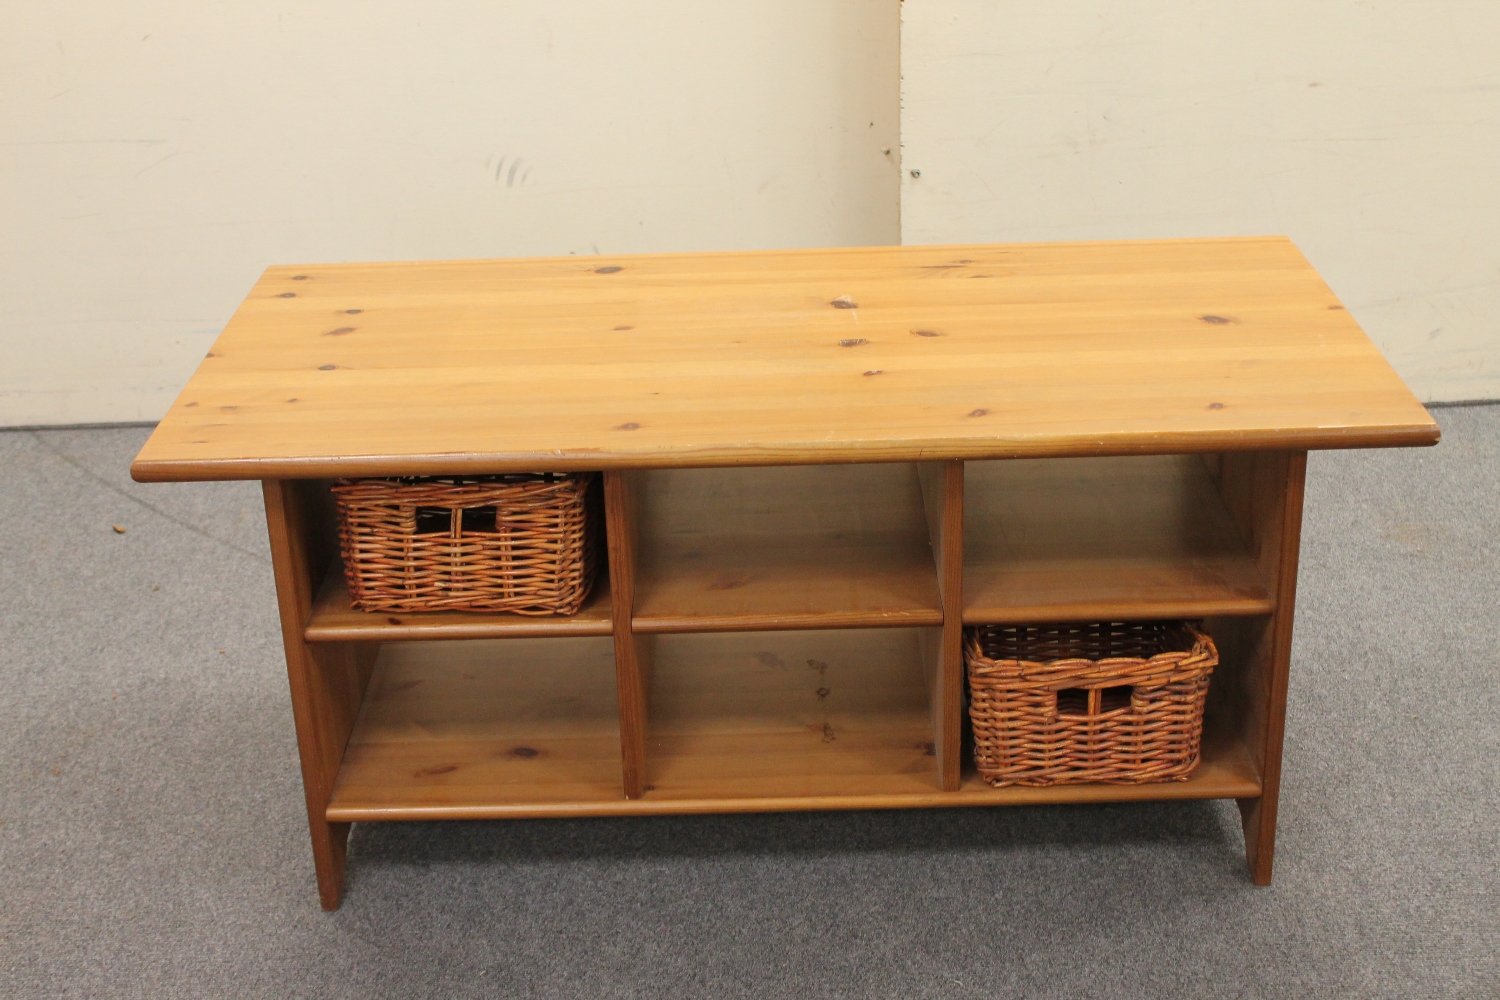 A pine low storage table